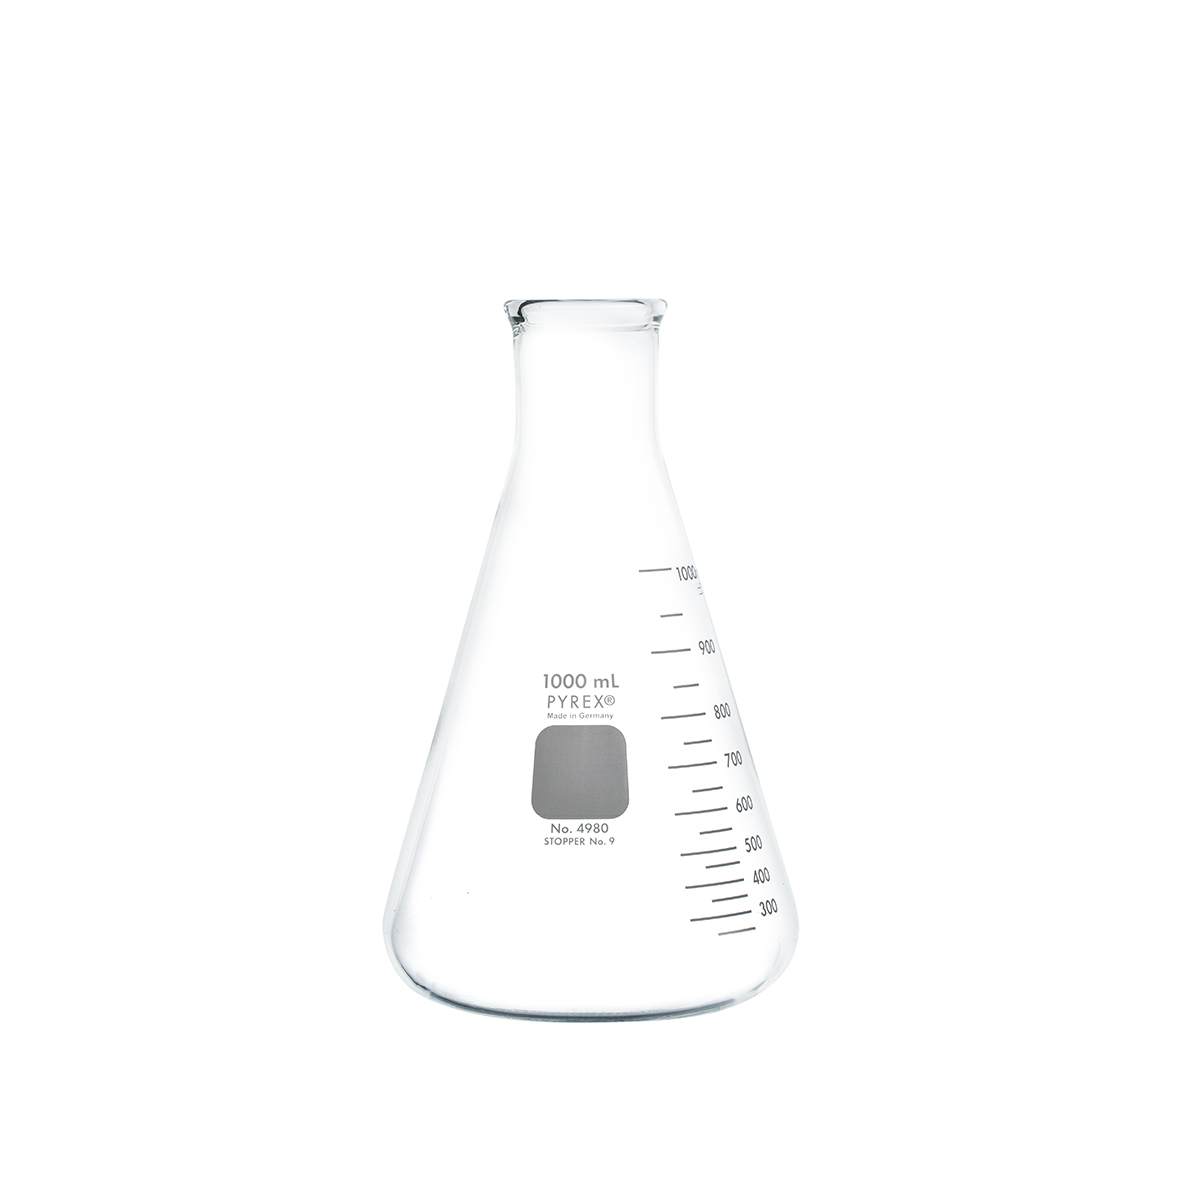 Corning Pyrex Borosilicate Glass Narrow Mouth Erlenmeyer Flasks with Heavy  Duty Rim, 1000ml Capacity (Case of 24)